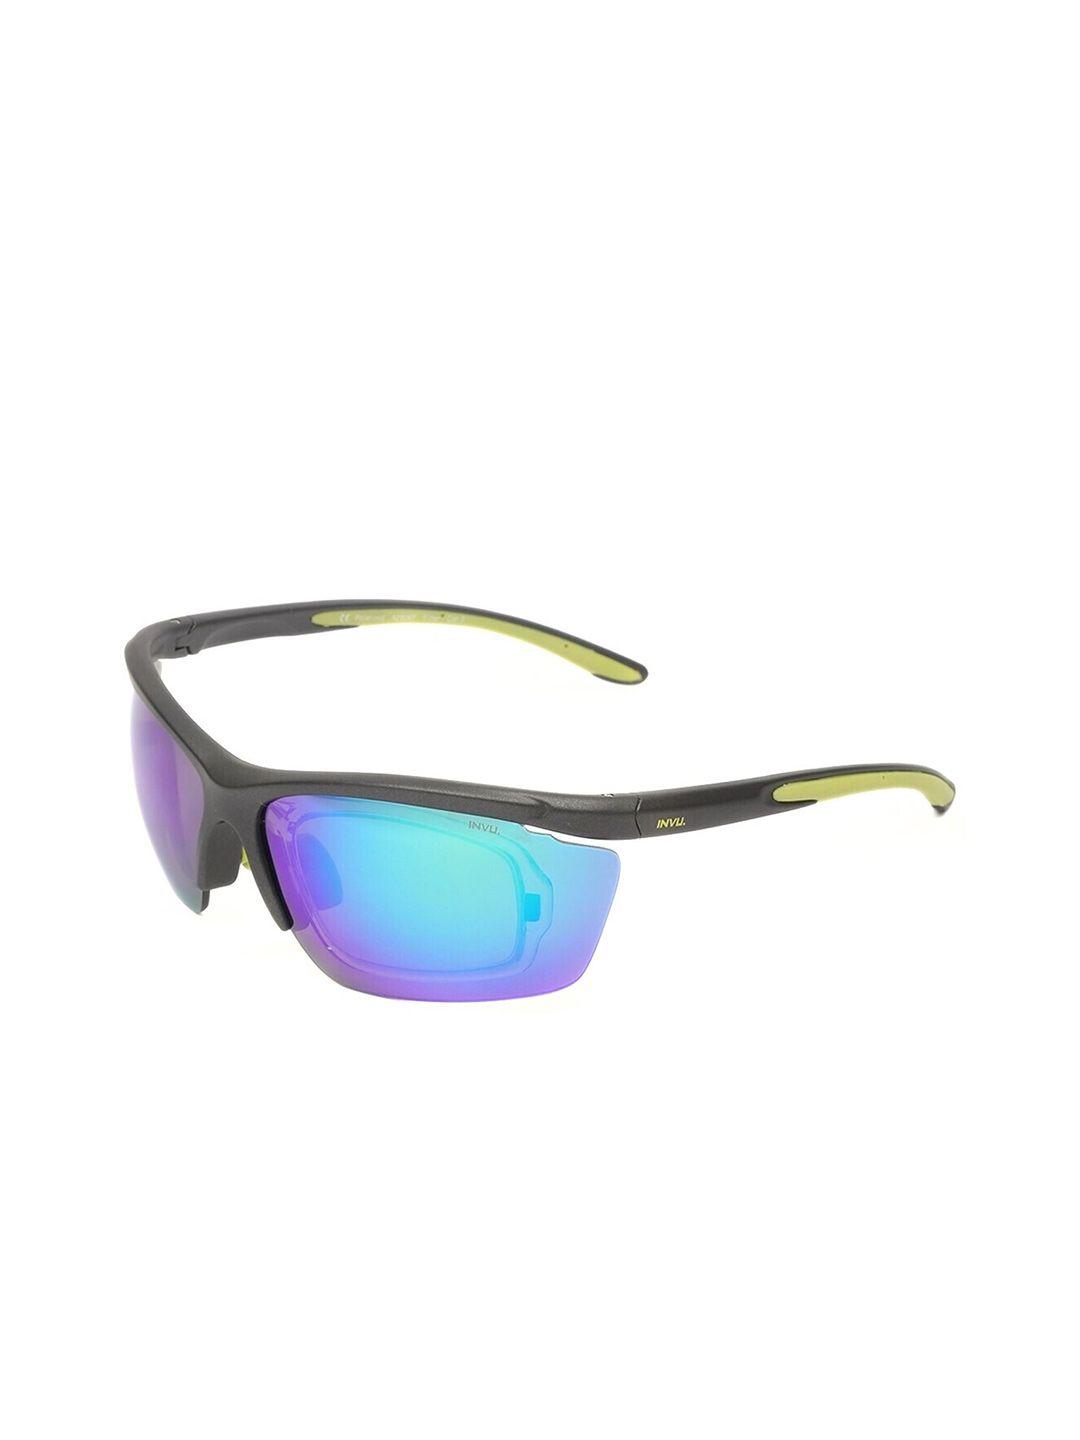 invu unisex sports sunglasses with uv protected lens a2806f